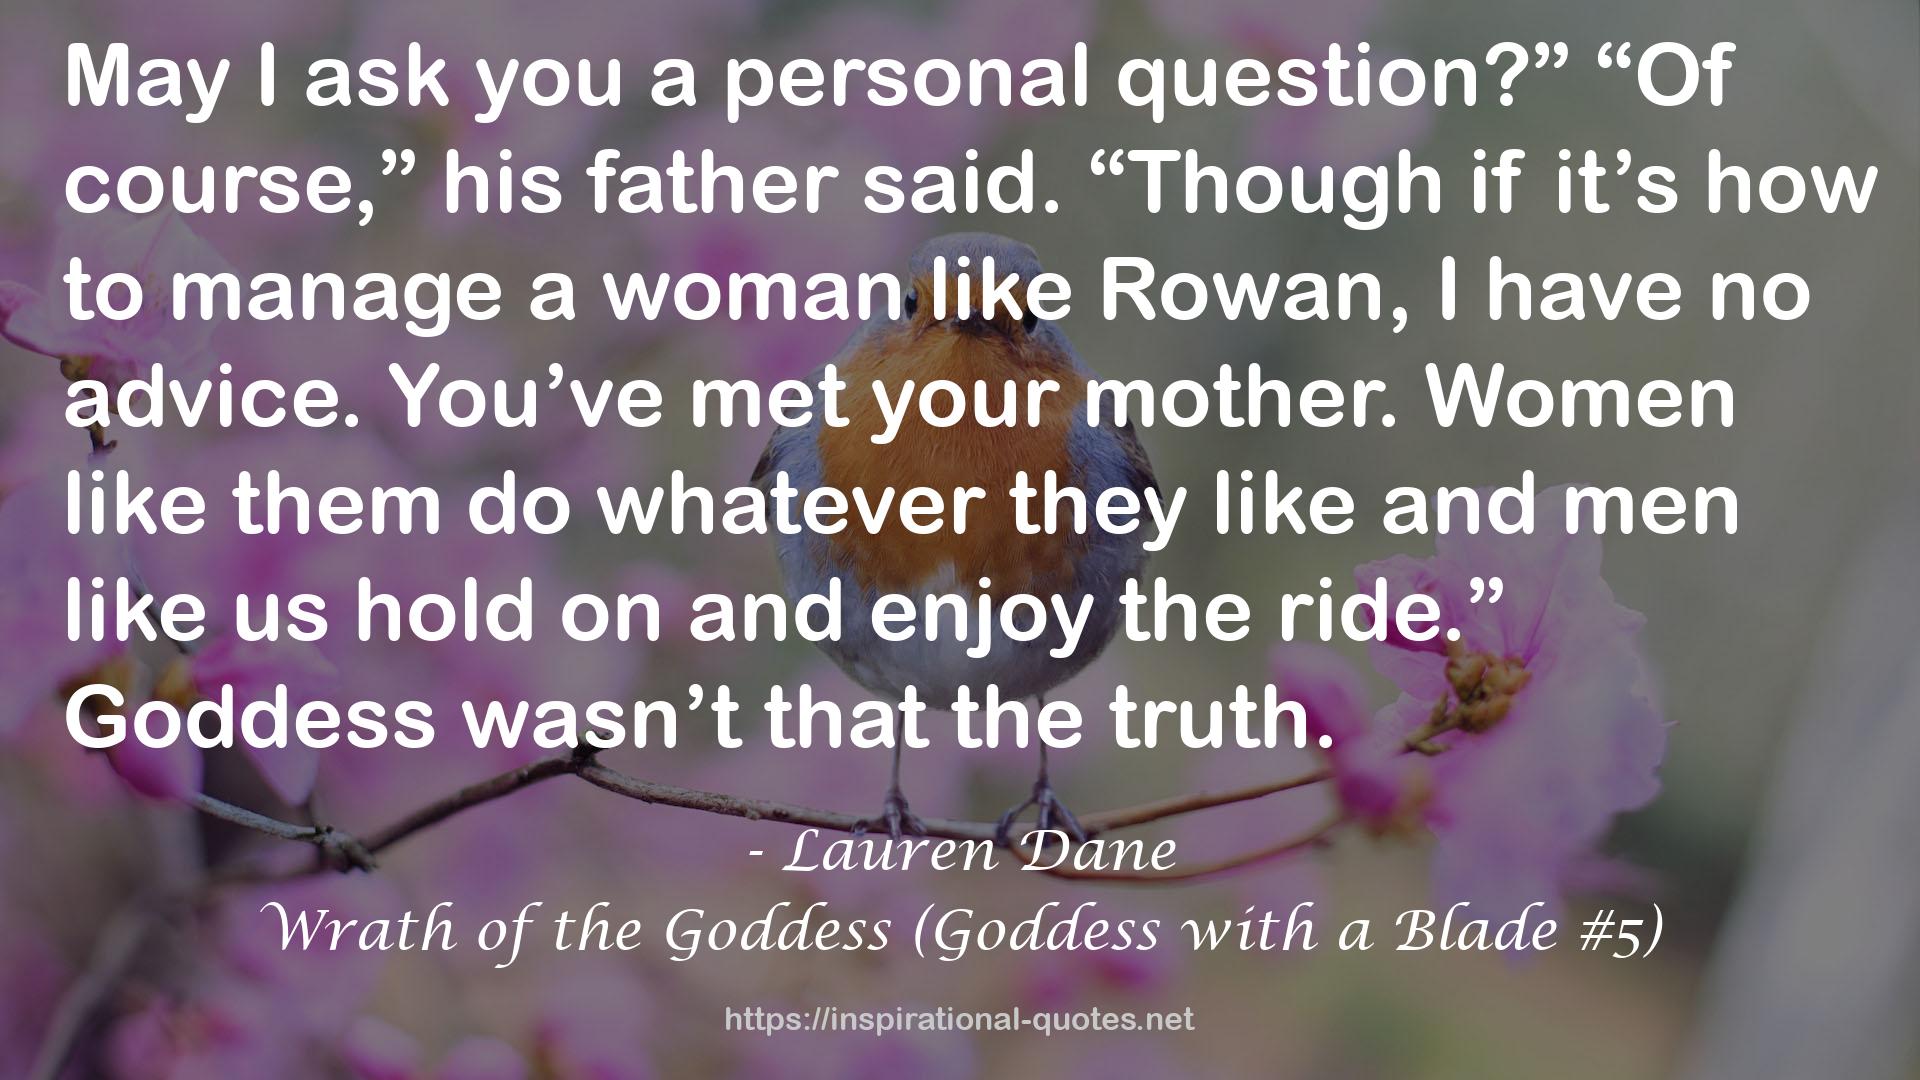 Wrath of the Goddess (Goddess with a Blade #5) QUOTES